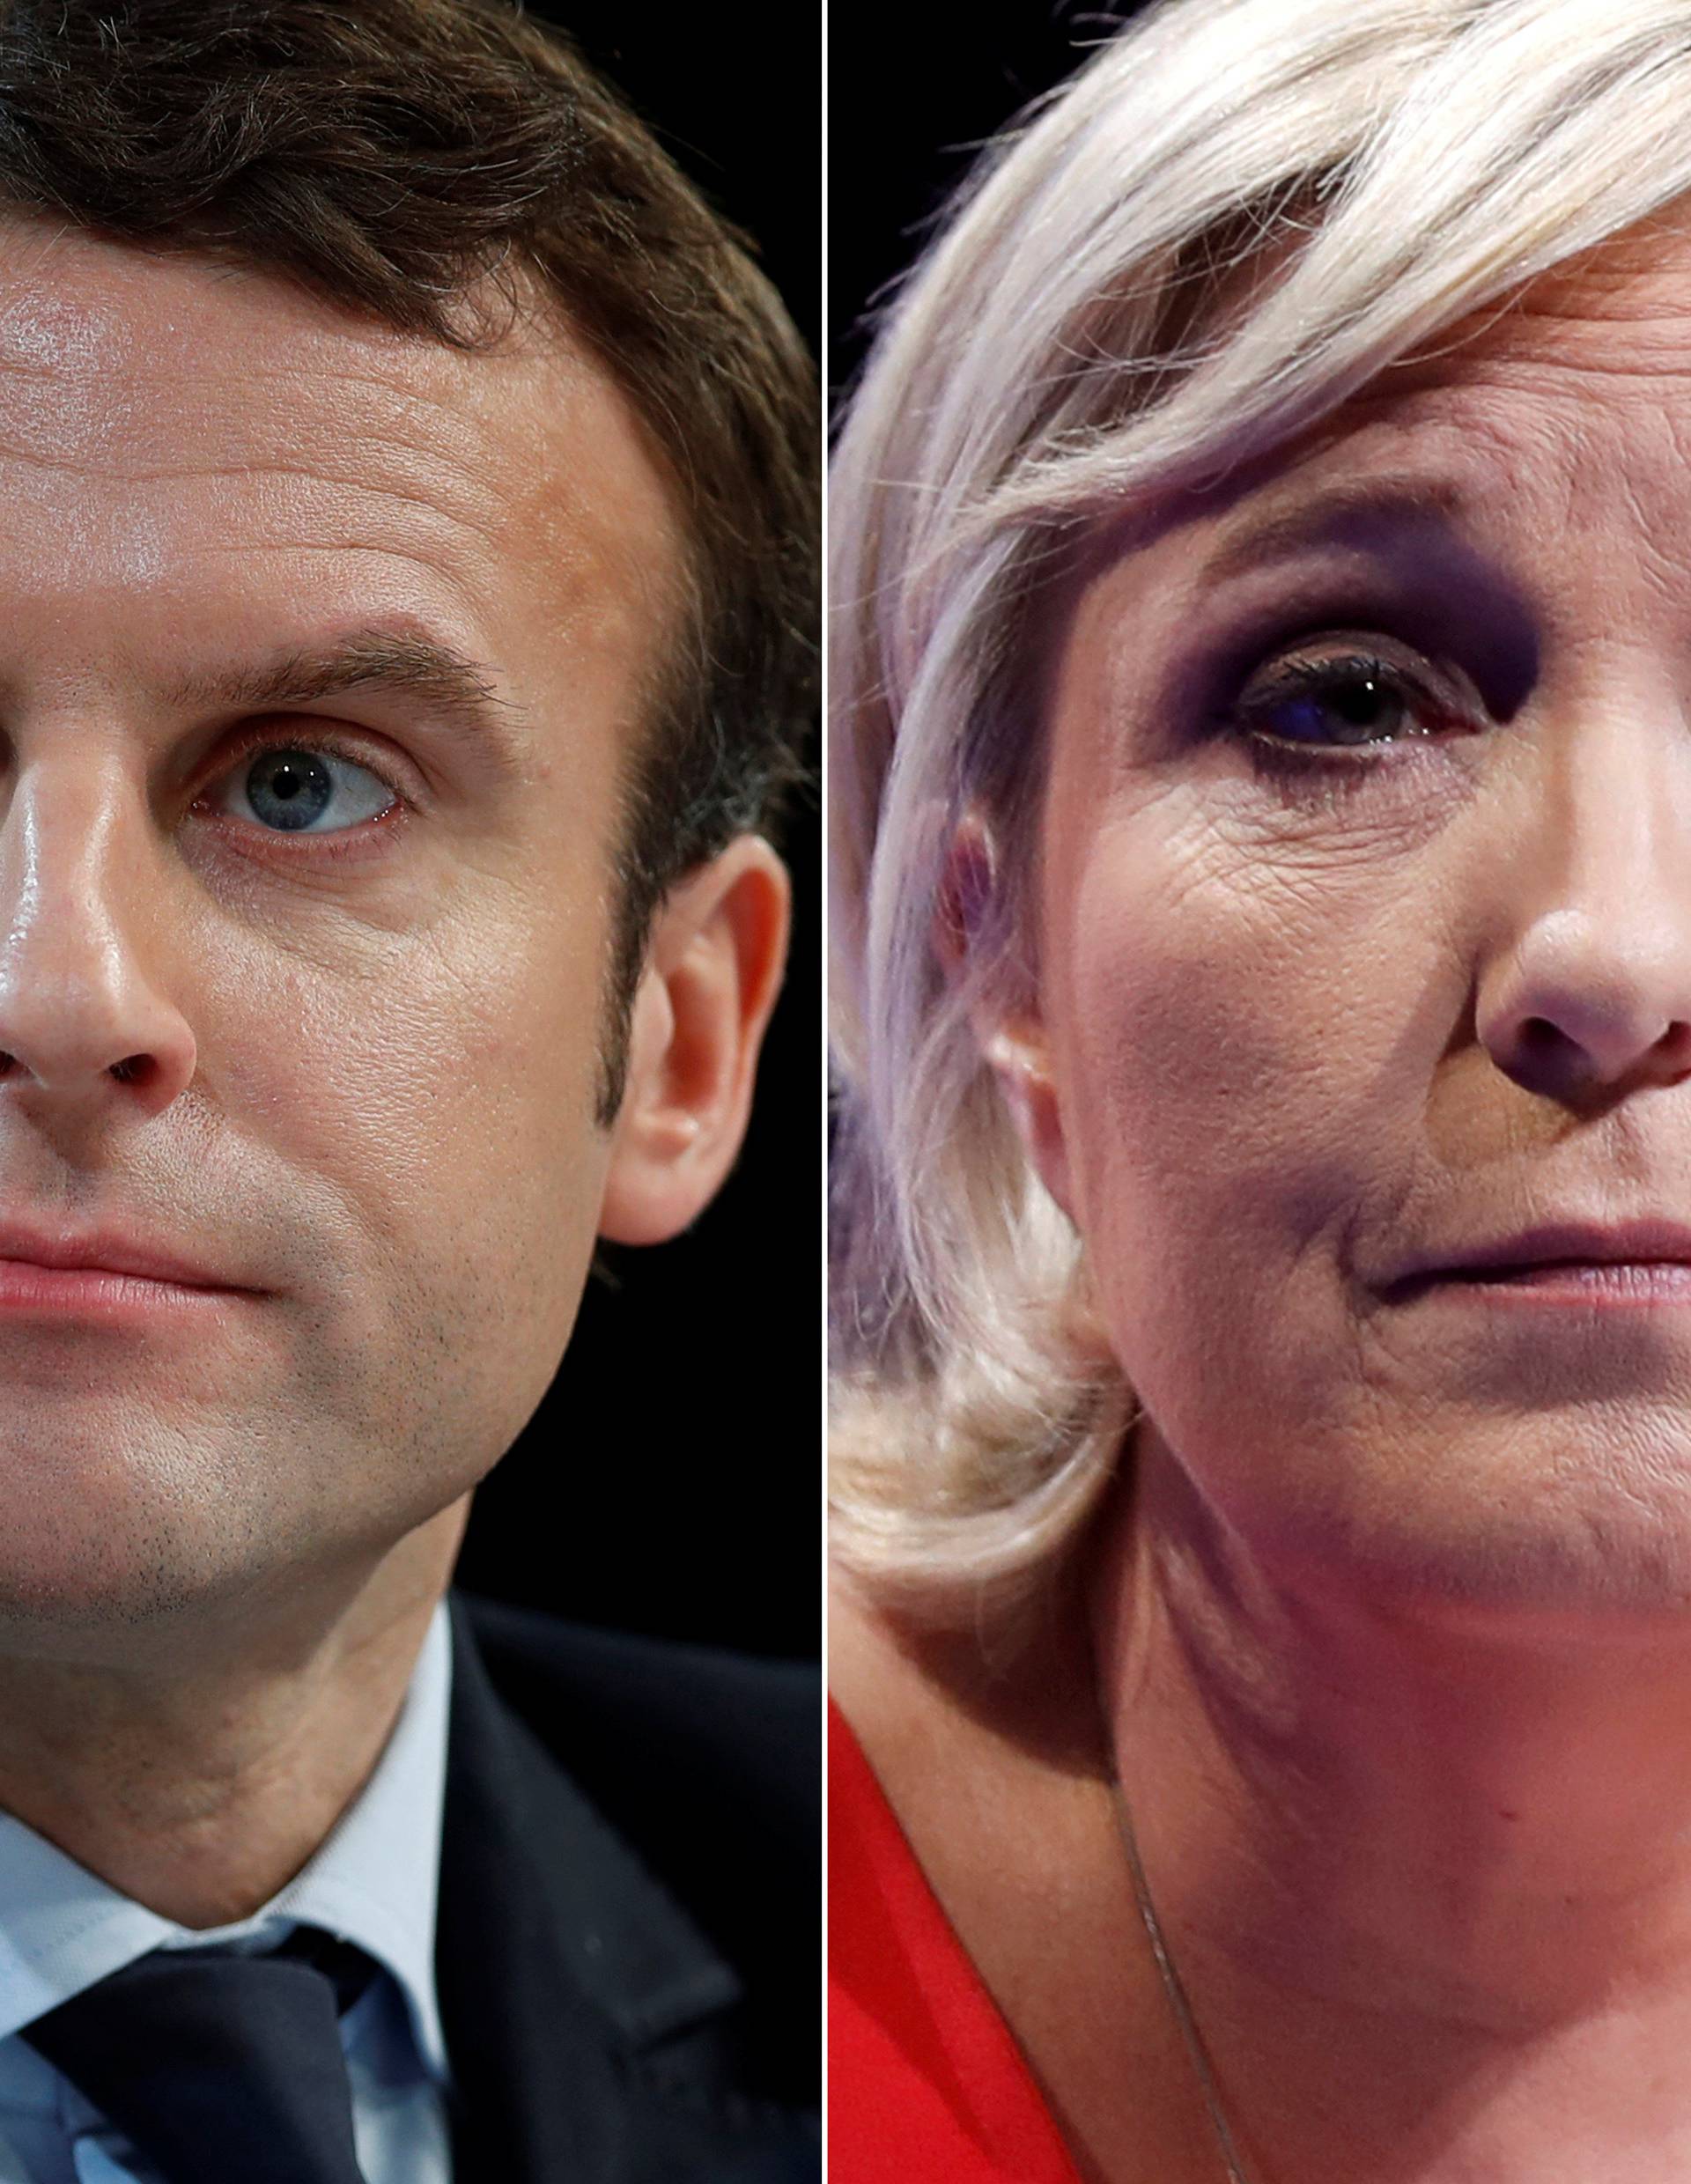 A combination picture shows portraits of the candidates, Macron and Le Pen, who will run in the second round in the 2017 French presidential election in France